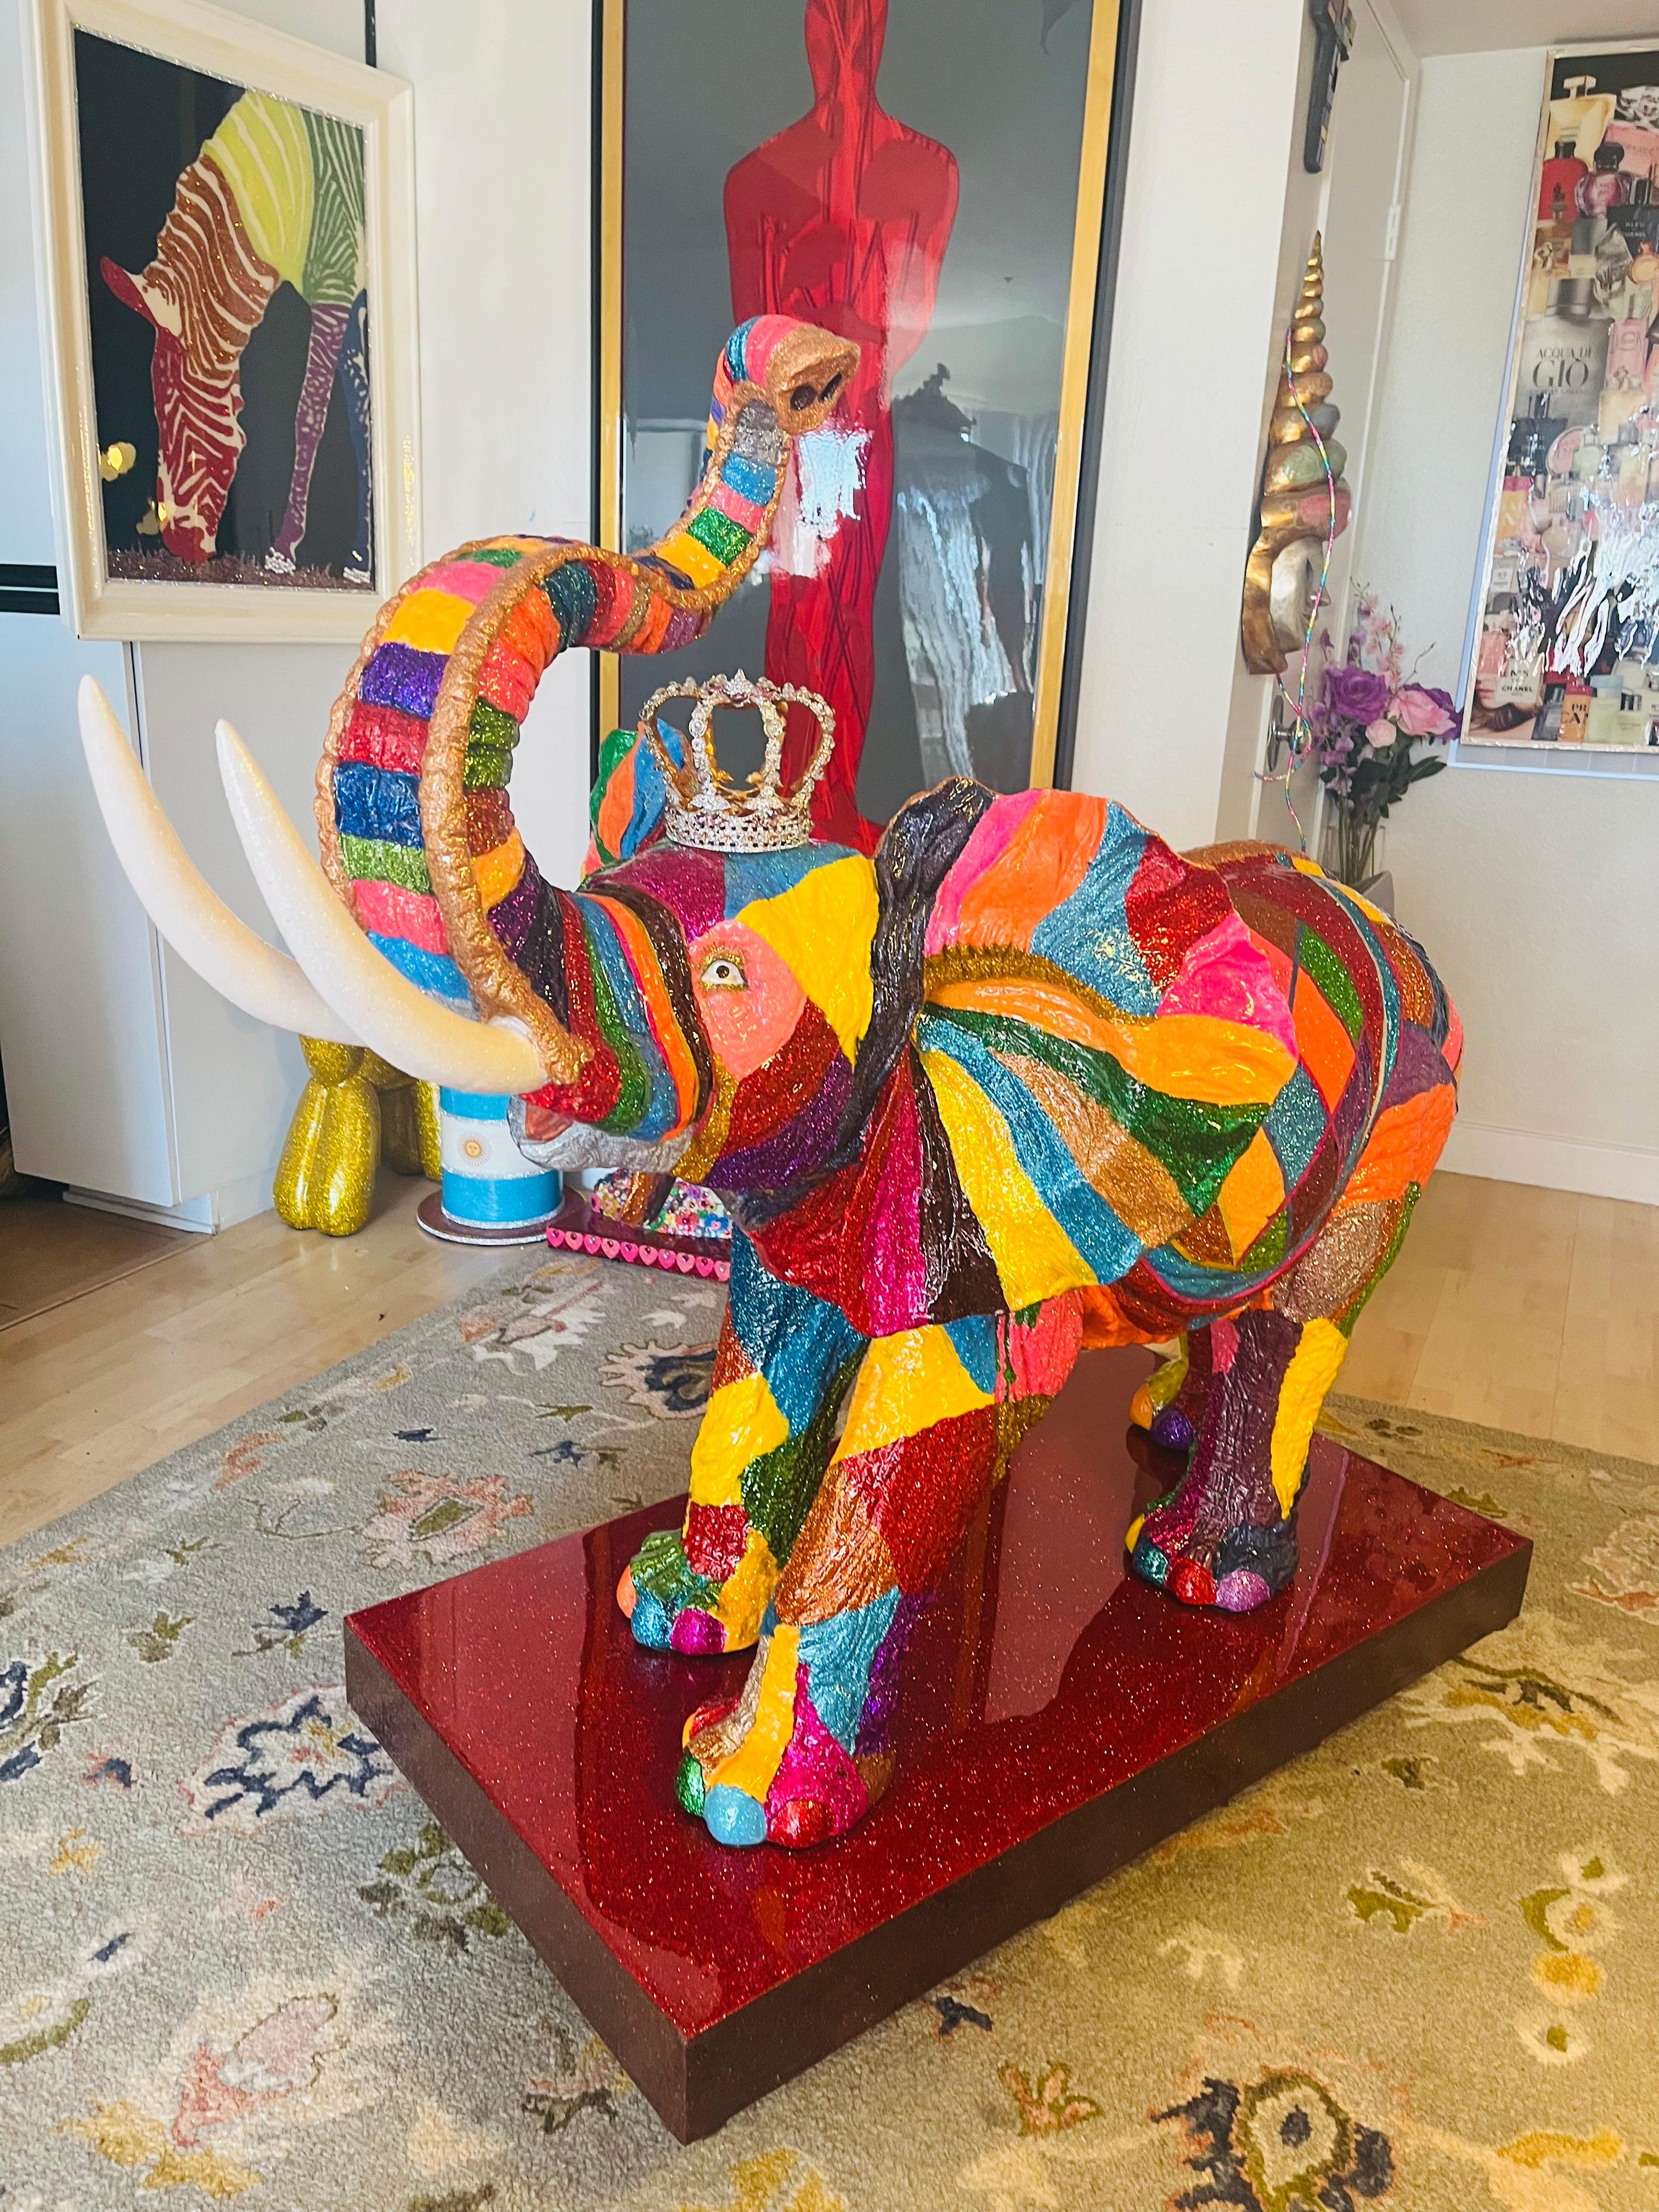 *LIMITED TIME SUPER SALE UNTIL MAY 31ST - TAKE ADVANTAGE OF IT*

**Encouraged to be sold in California, where it will get FREE White Glove Delivery and Installation by the Artist**

'Ella-Bella: The Elephant Crown Princess' is one of a kind Elephant